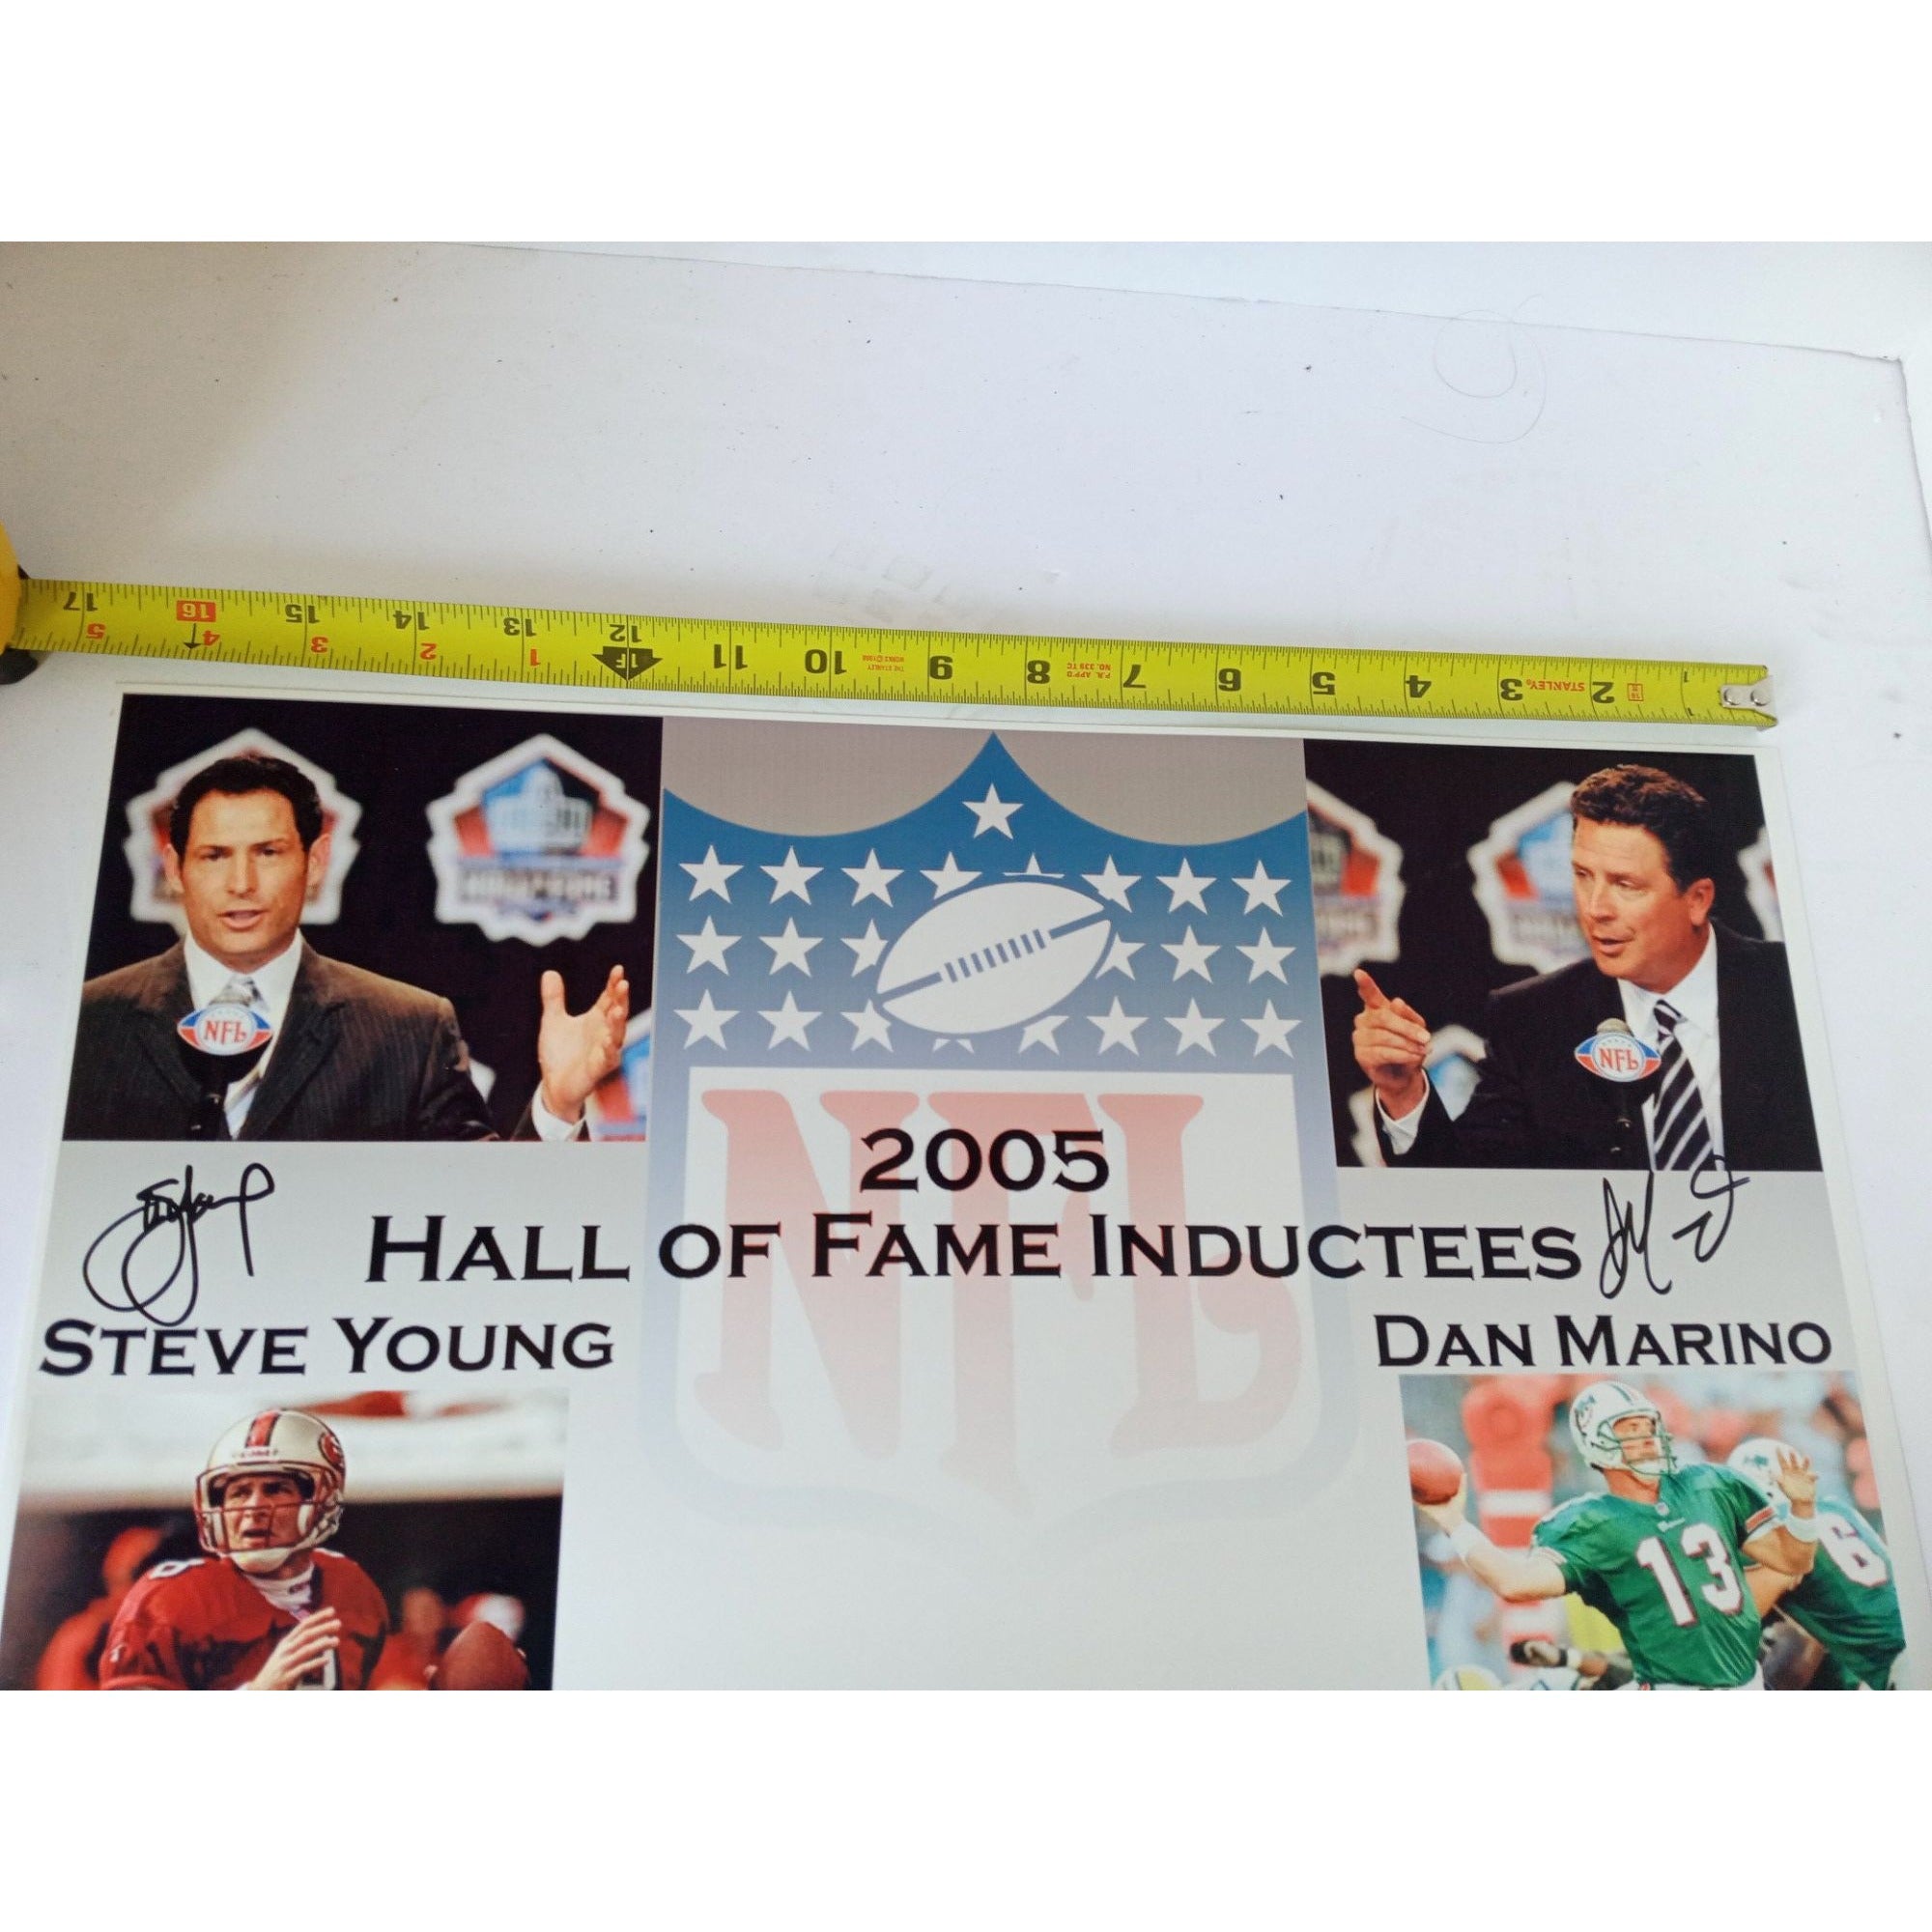 Dan Marino and Steve Young 11 x 17 signed photo with proof